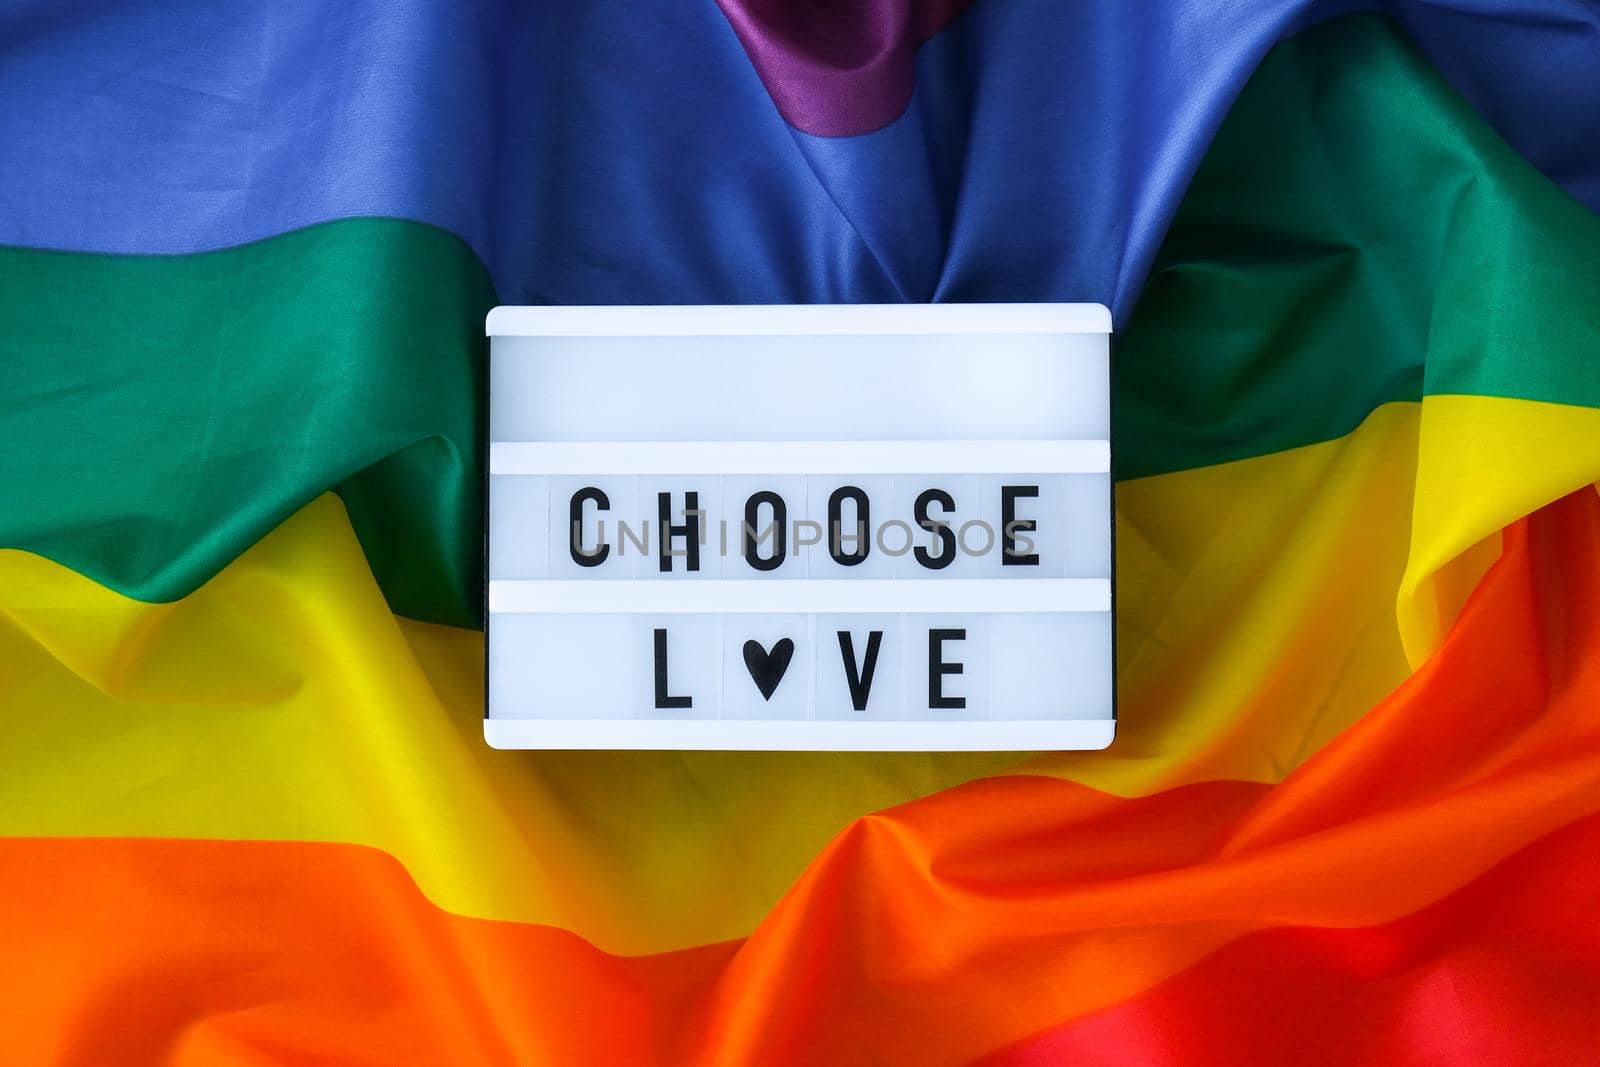 Rainbow flag with lightbox and text CHOOSE LOVE. Rainbow lgbtq flag made from silk material. Symbol of LGBTQ pride month. Equal rights. Peace and freedom. Support LGBTQ community